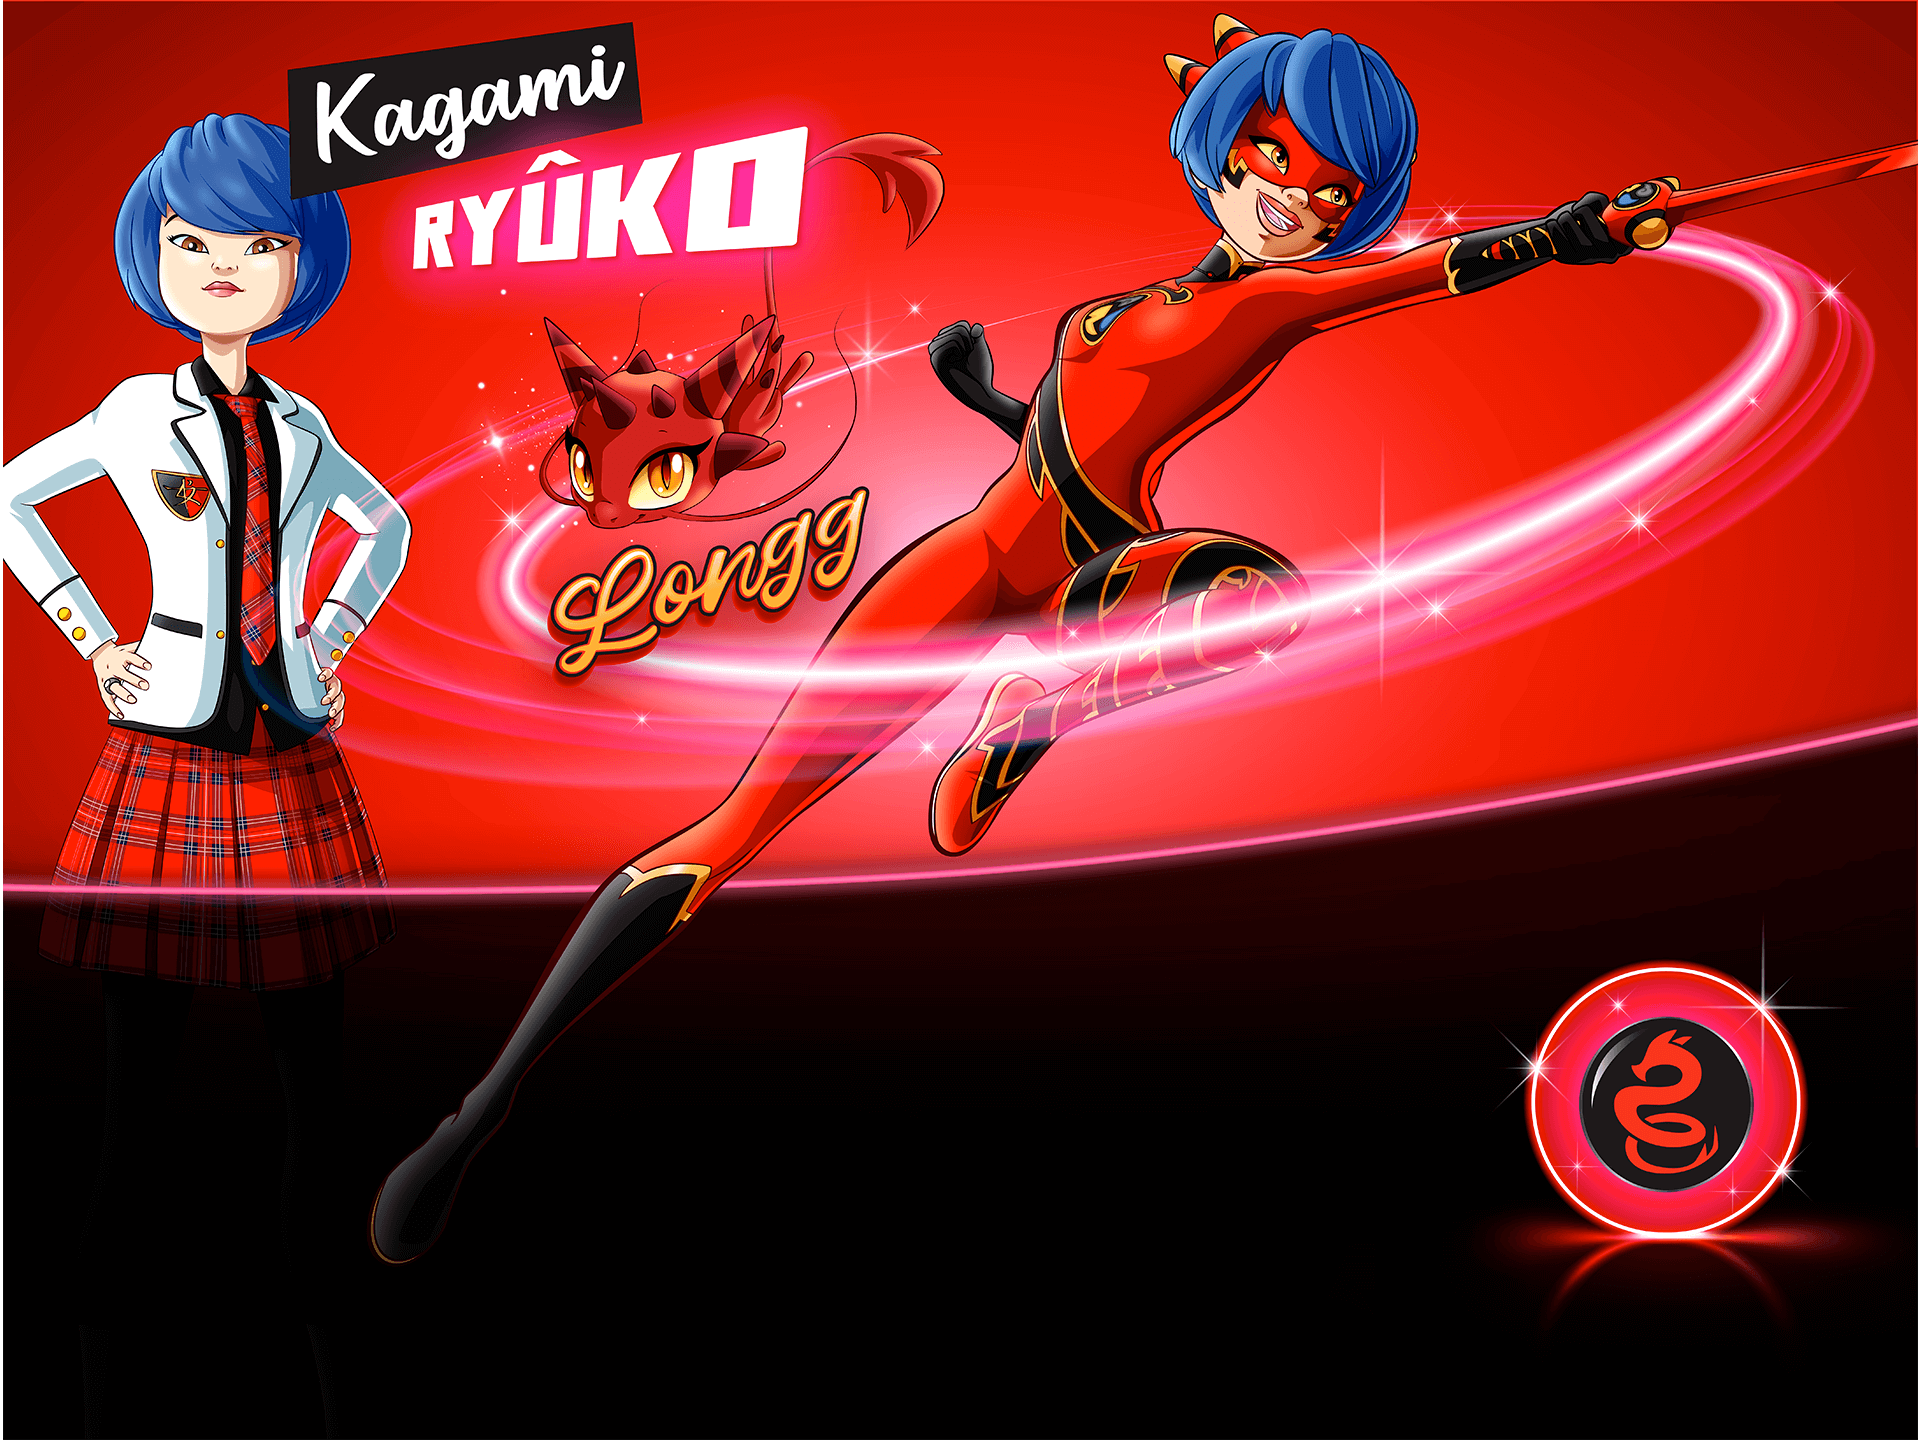 Miraculous Ladybug new wallpapers with super heroes and kwamis.